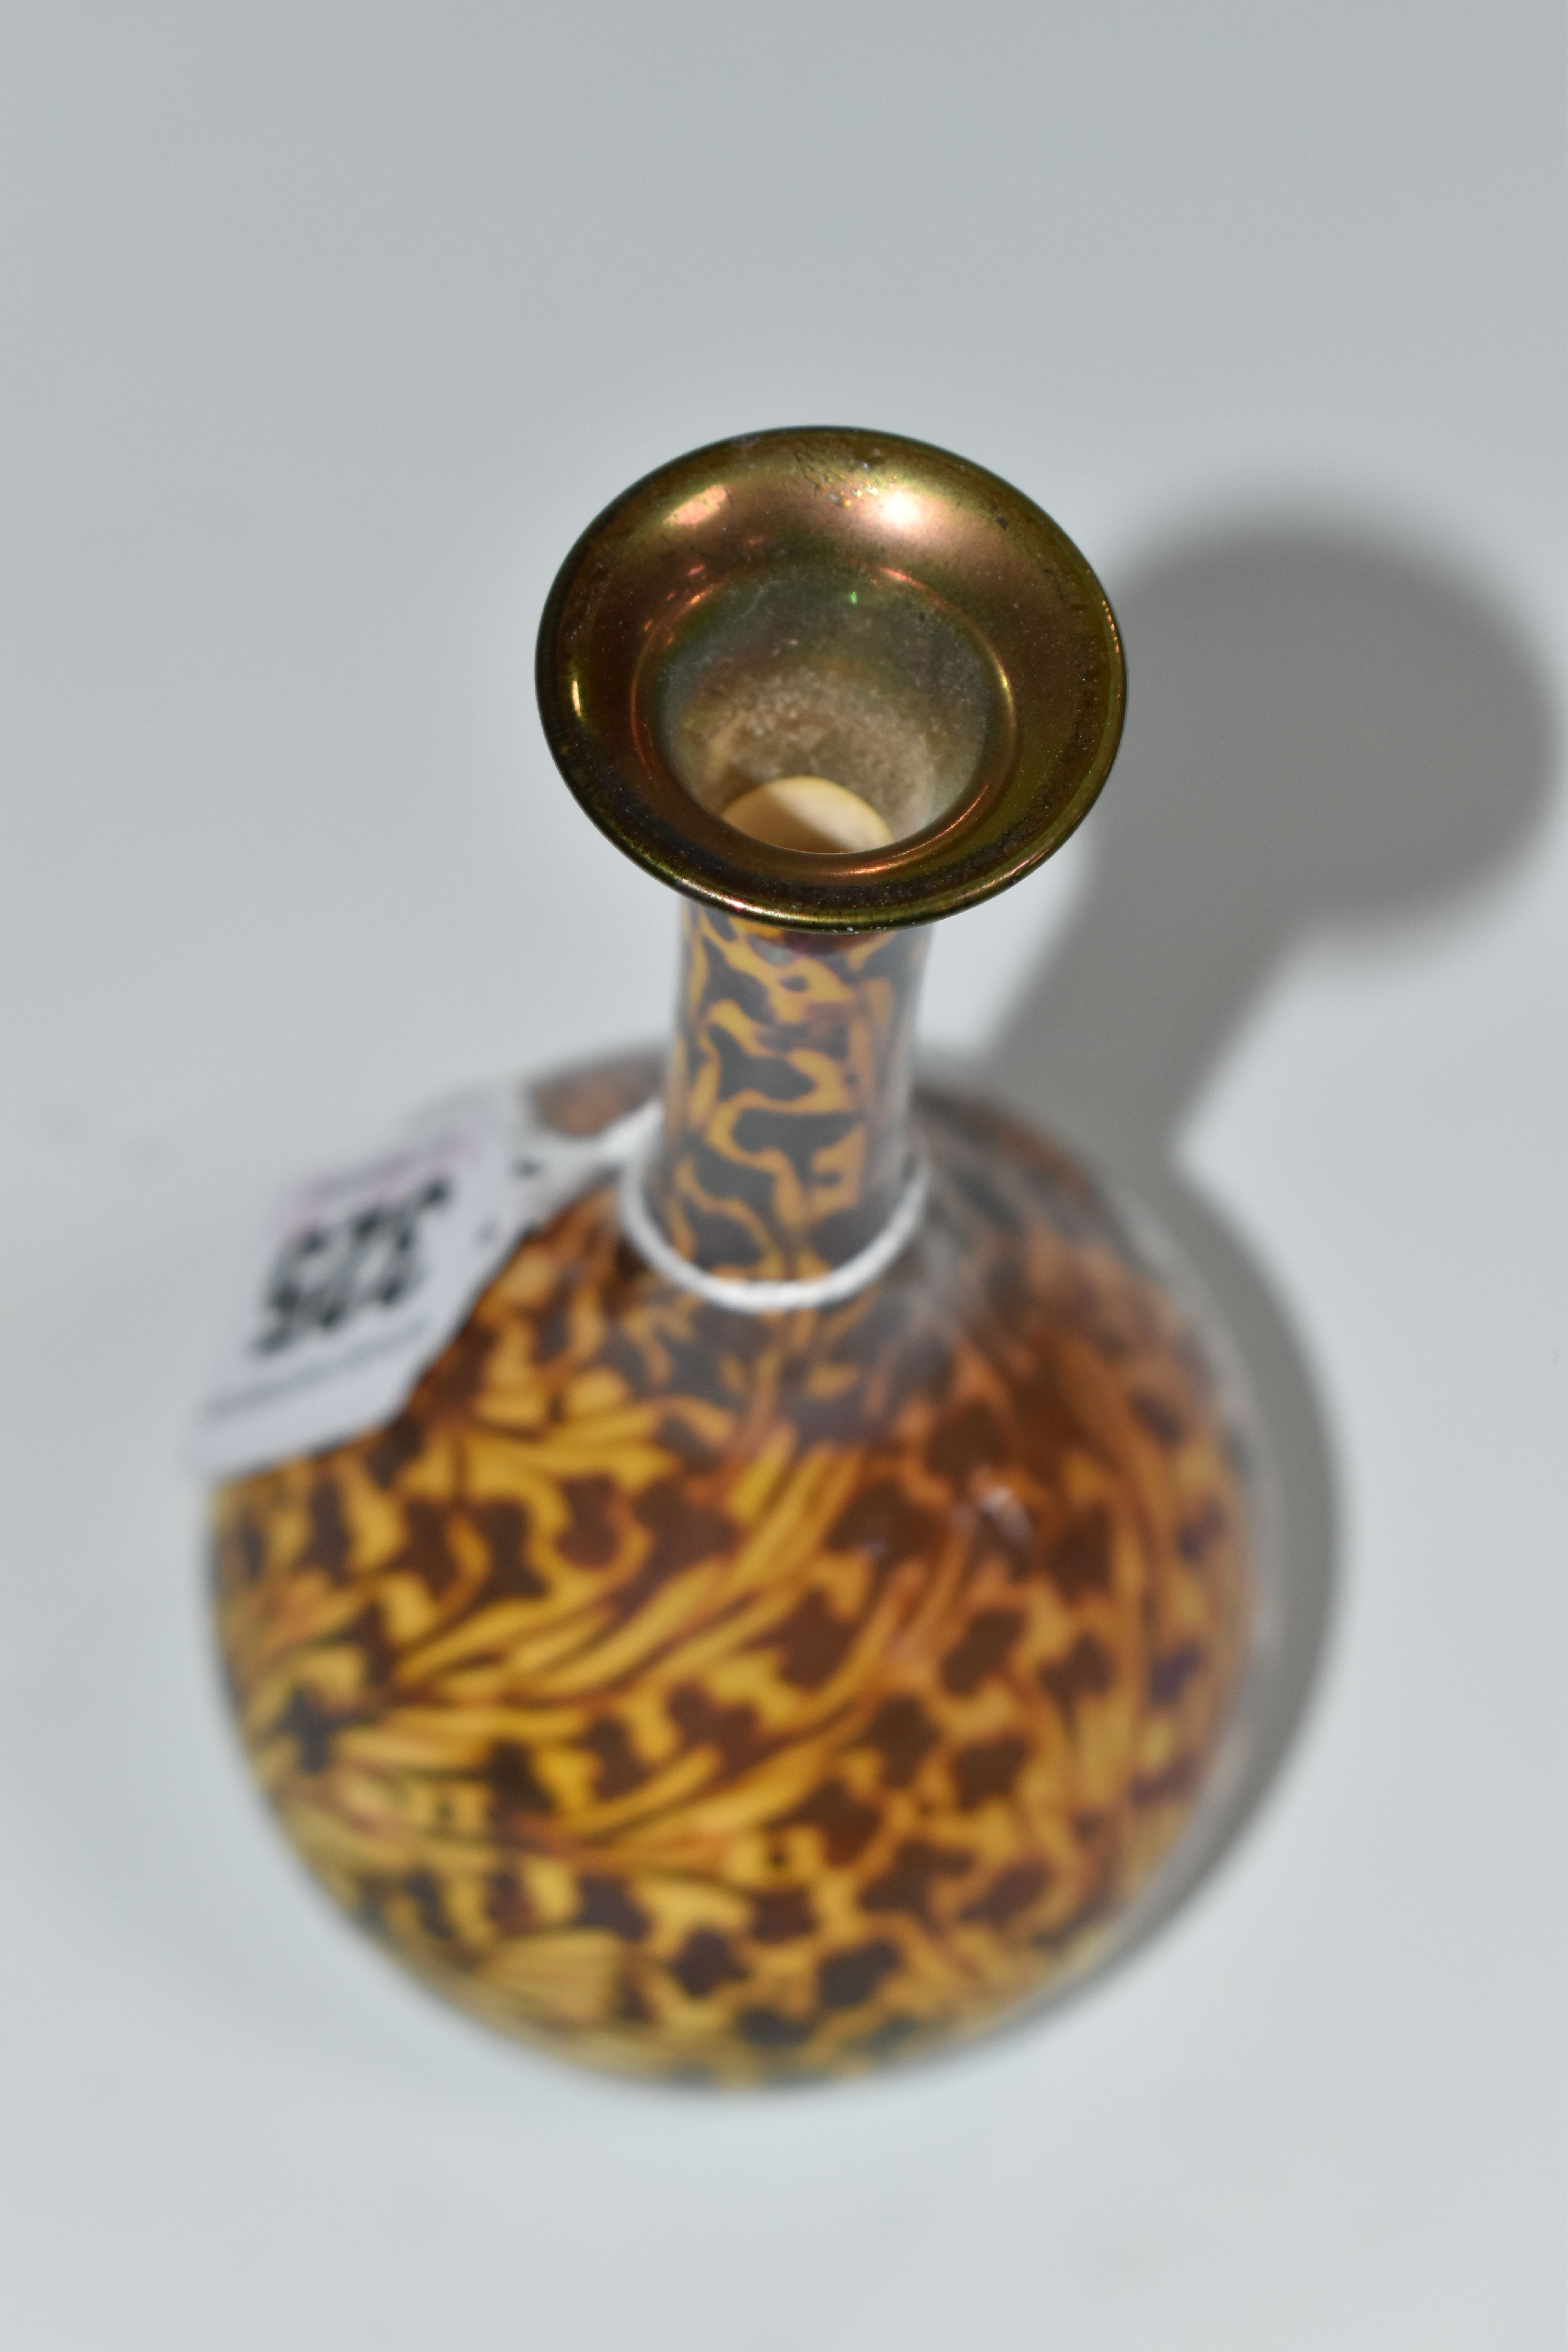 A PILKINGTON'S BUD VASE, with foliate decoration on a yellow ground, model no 2598, impressed P - Image 4 of 5